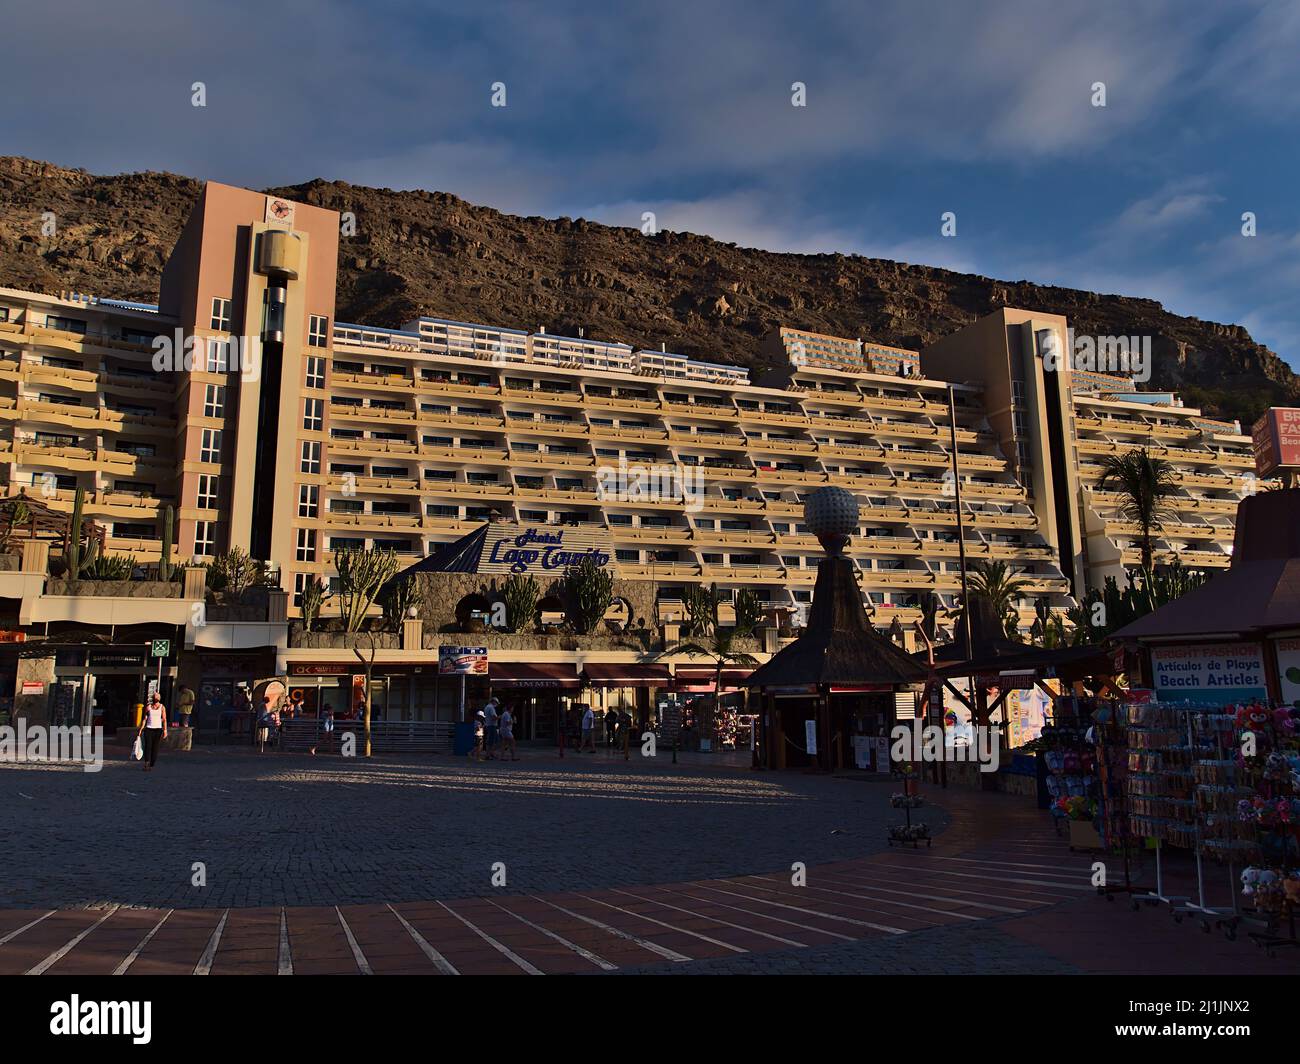 Front view of popular Hotel Paradise Lago Taurito located in a valley in southern Gran Canaria, Spain in the evening with shops and people walking by. Stock Photo